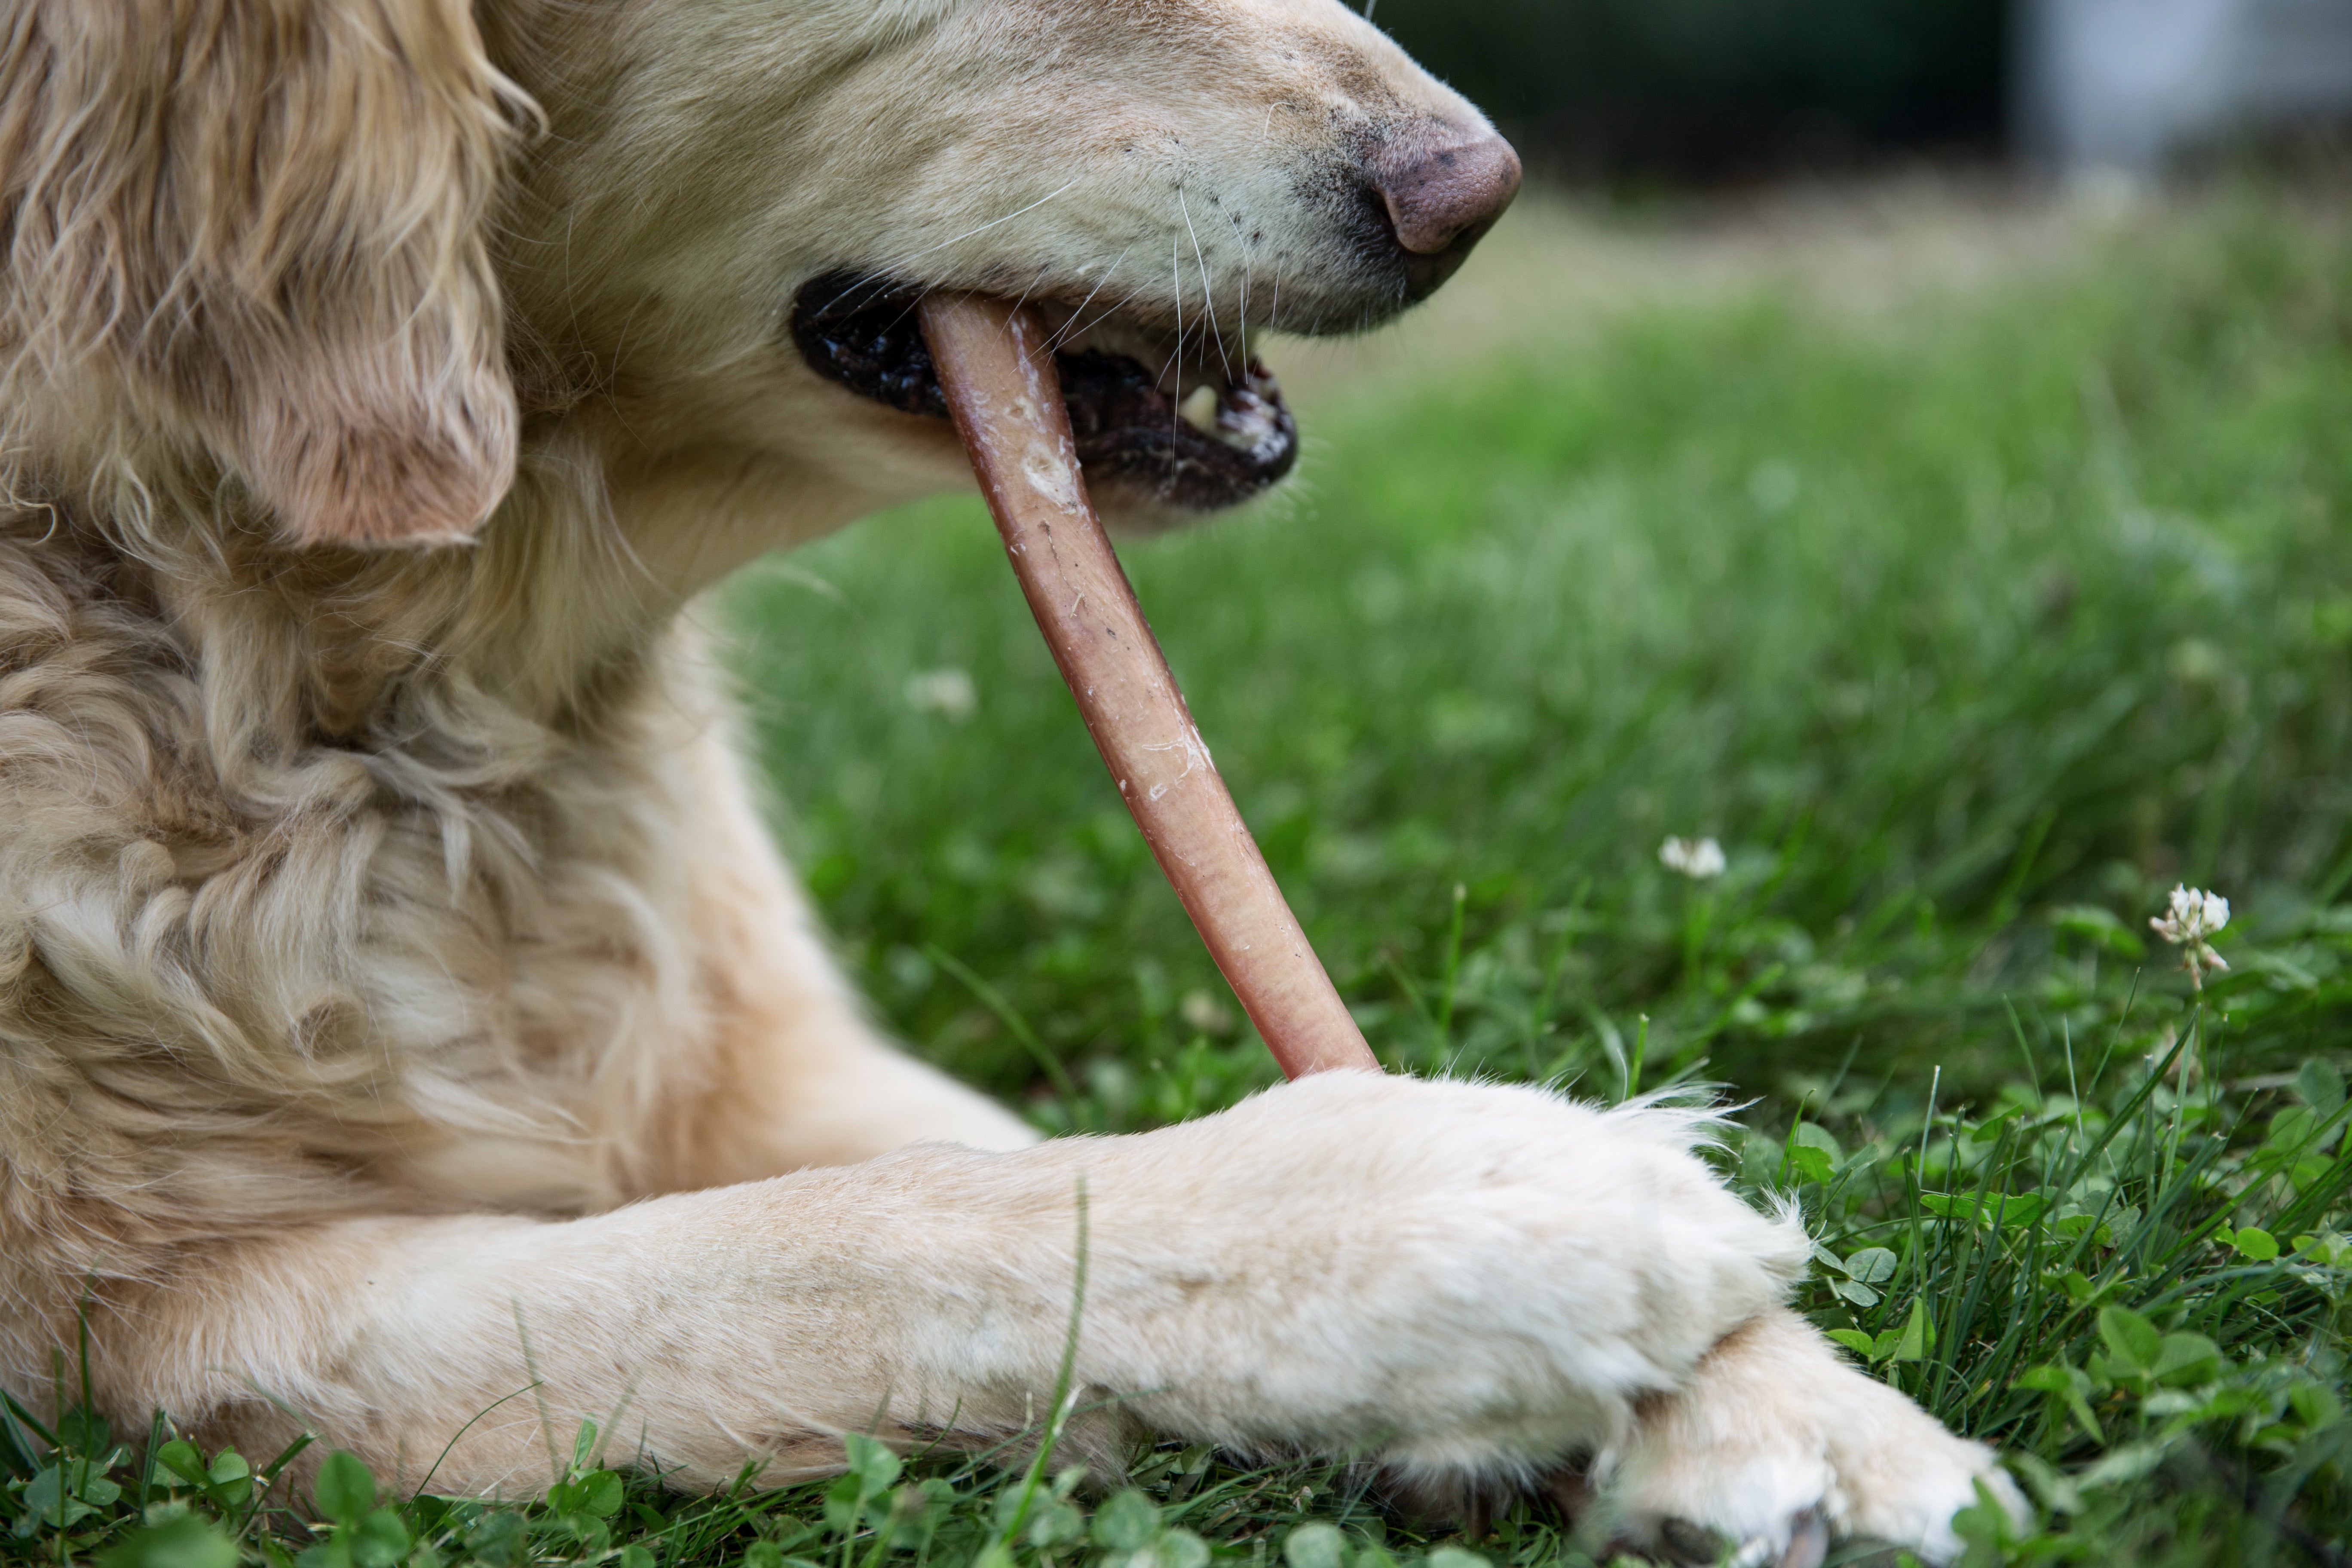 Golden Retriever chews on Mighty Paw bully stick in grass.